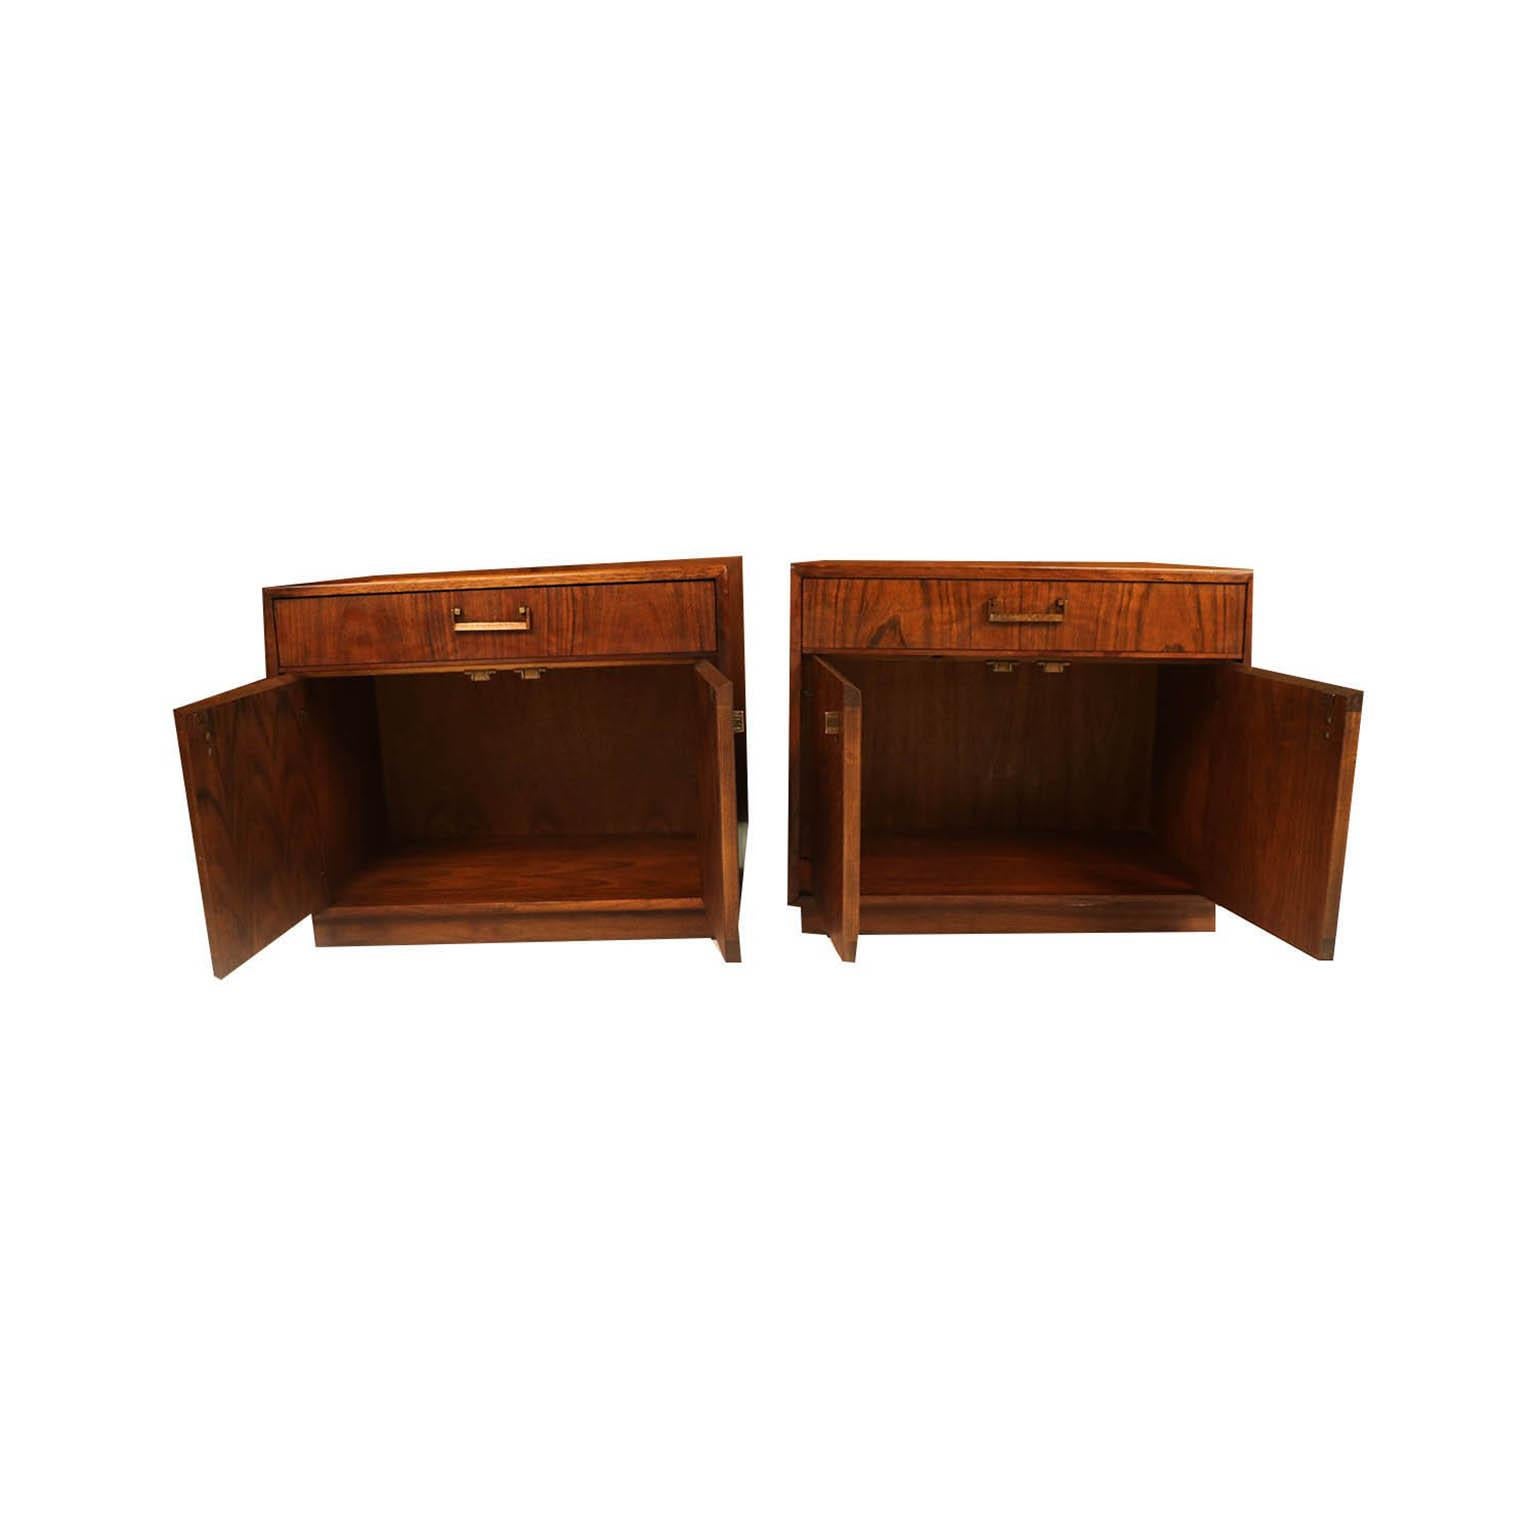 Handsome, richly grained walnut Mid-Century Modern nightstands or end tables, in the style of Milo Baughman, by Founders Furniture Company, USA, circa 1960s. Expertly crafted, these absolute jewels remain in clean vintage condition. Each features a